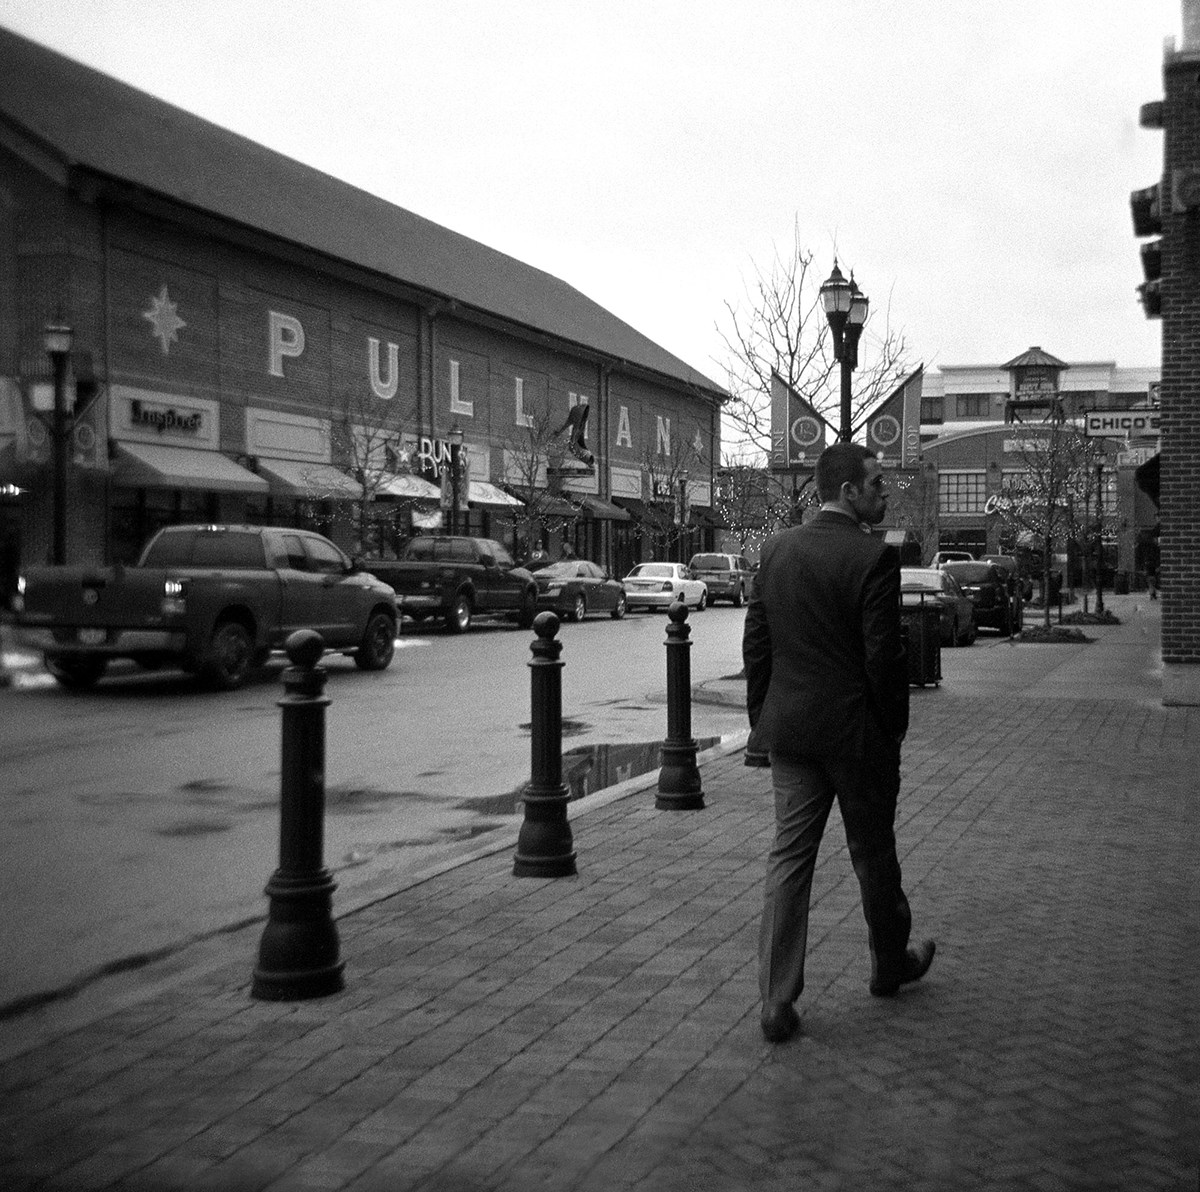 street photography streetphotography film photography FilmPhotography holga holga 120N holga120n art student Student work